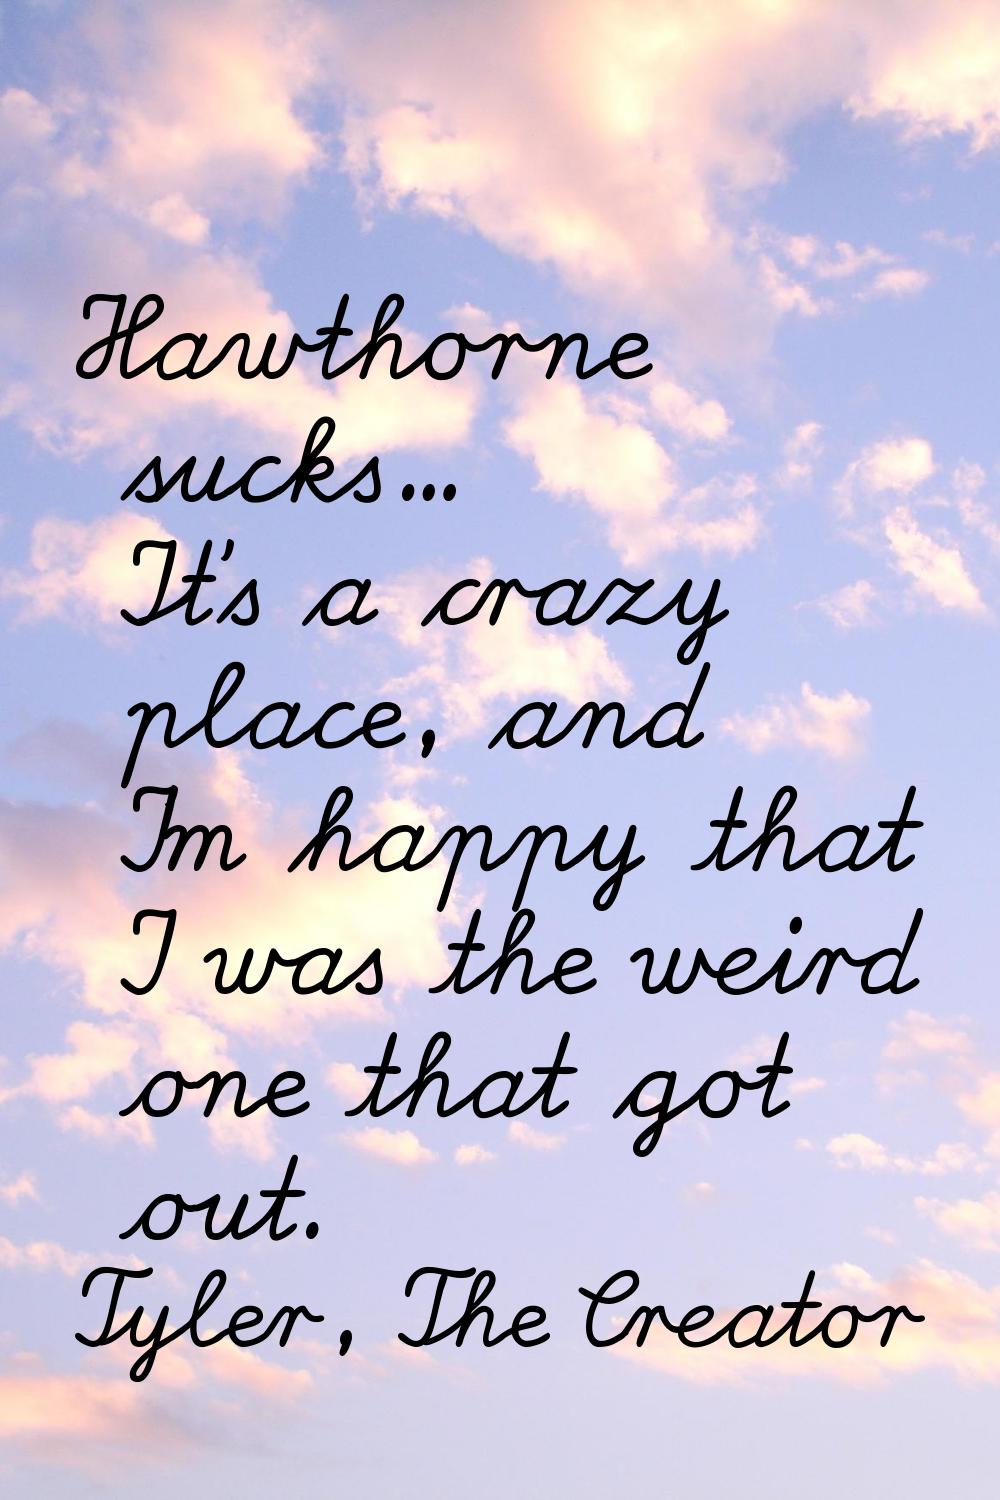 Hawthorne sucks... It's a crazy place, and I'm happy that I was the weird one that got out.